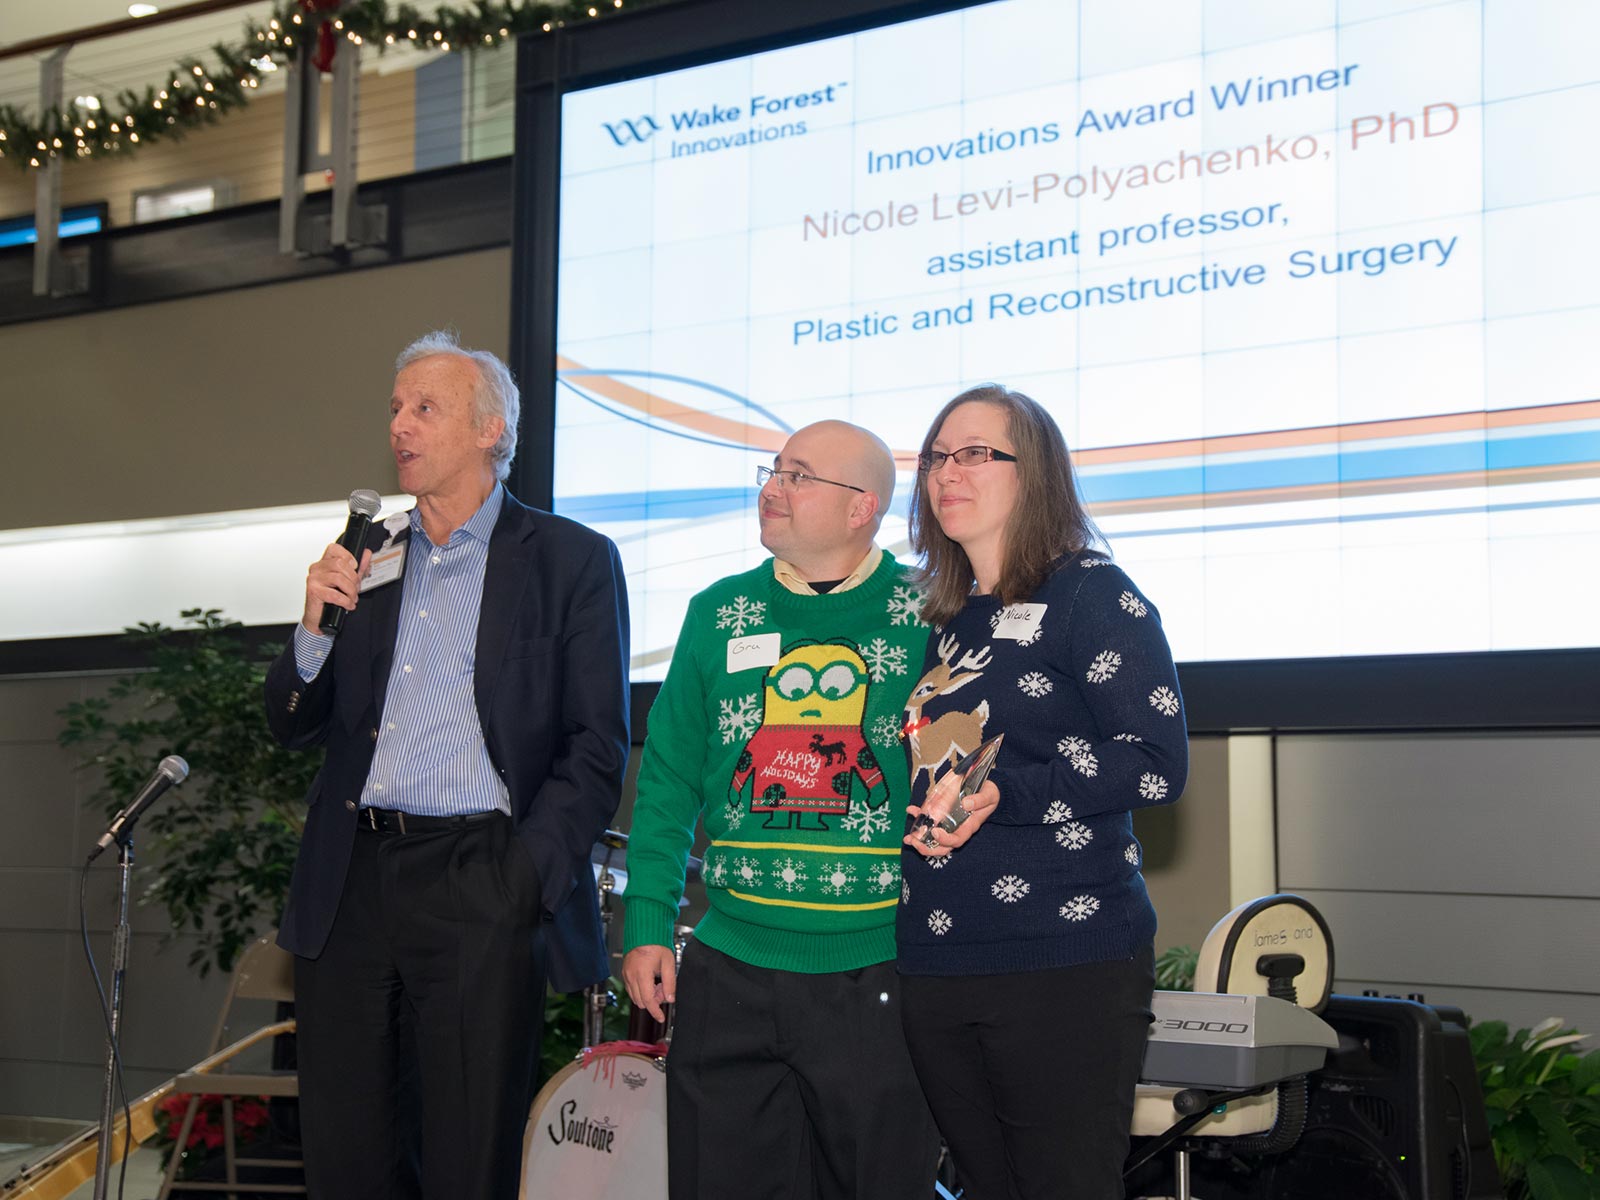 Nicole Levi-Polyachenko, pictured with her husband, Alex Polyachenko, received the Innovation Award from Eric Tomlinson (while proudly sporting the ugly sweater theme of the night's event)